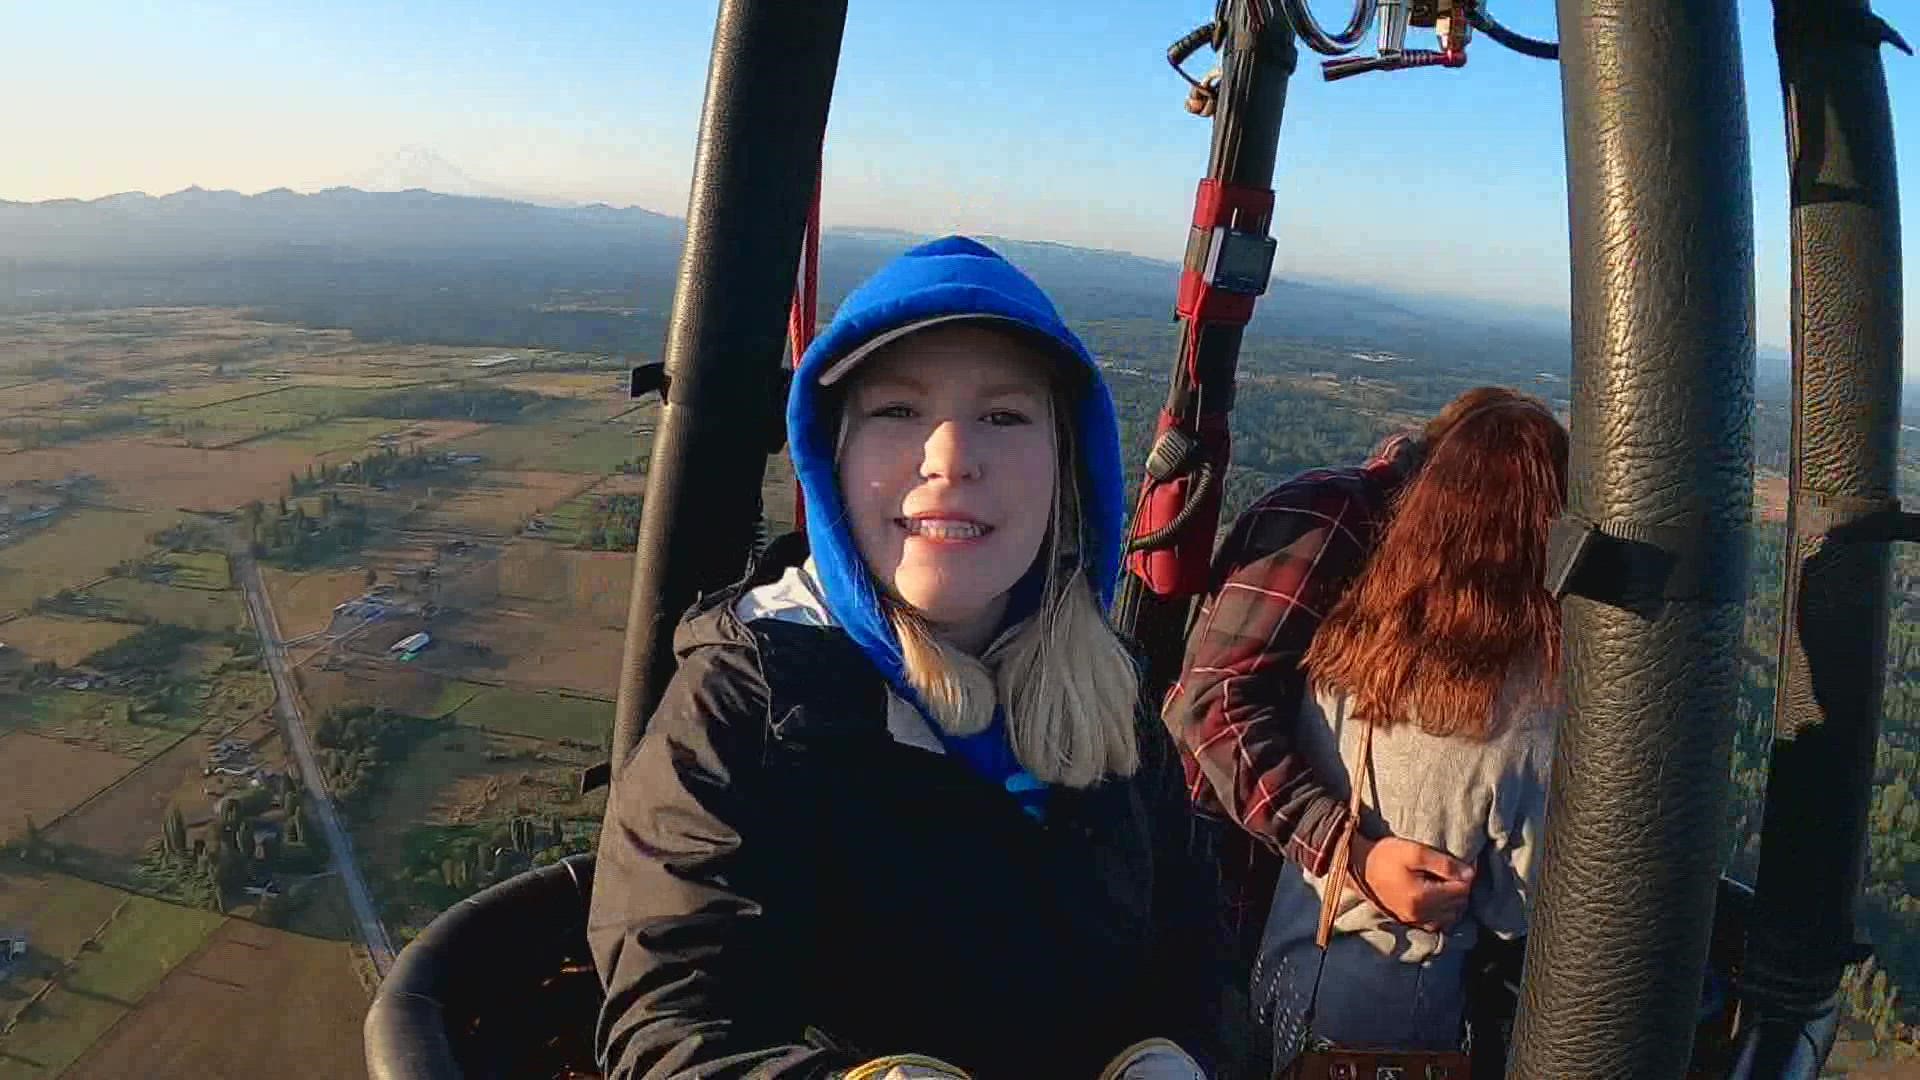 A young Bothell native is becoming an icon, leading a new generation of hot air balloon pilots in hopes of keeping an aging sport alive.